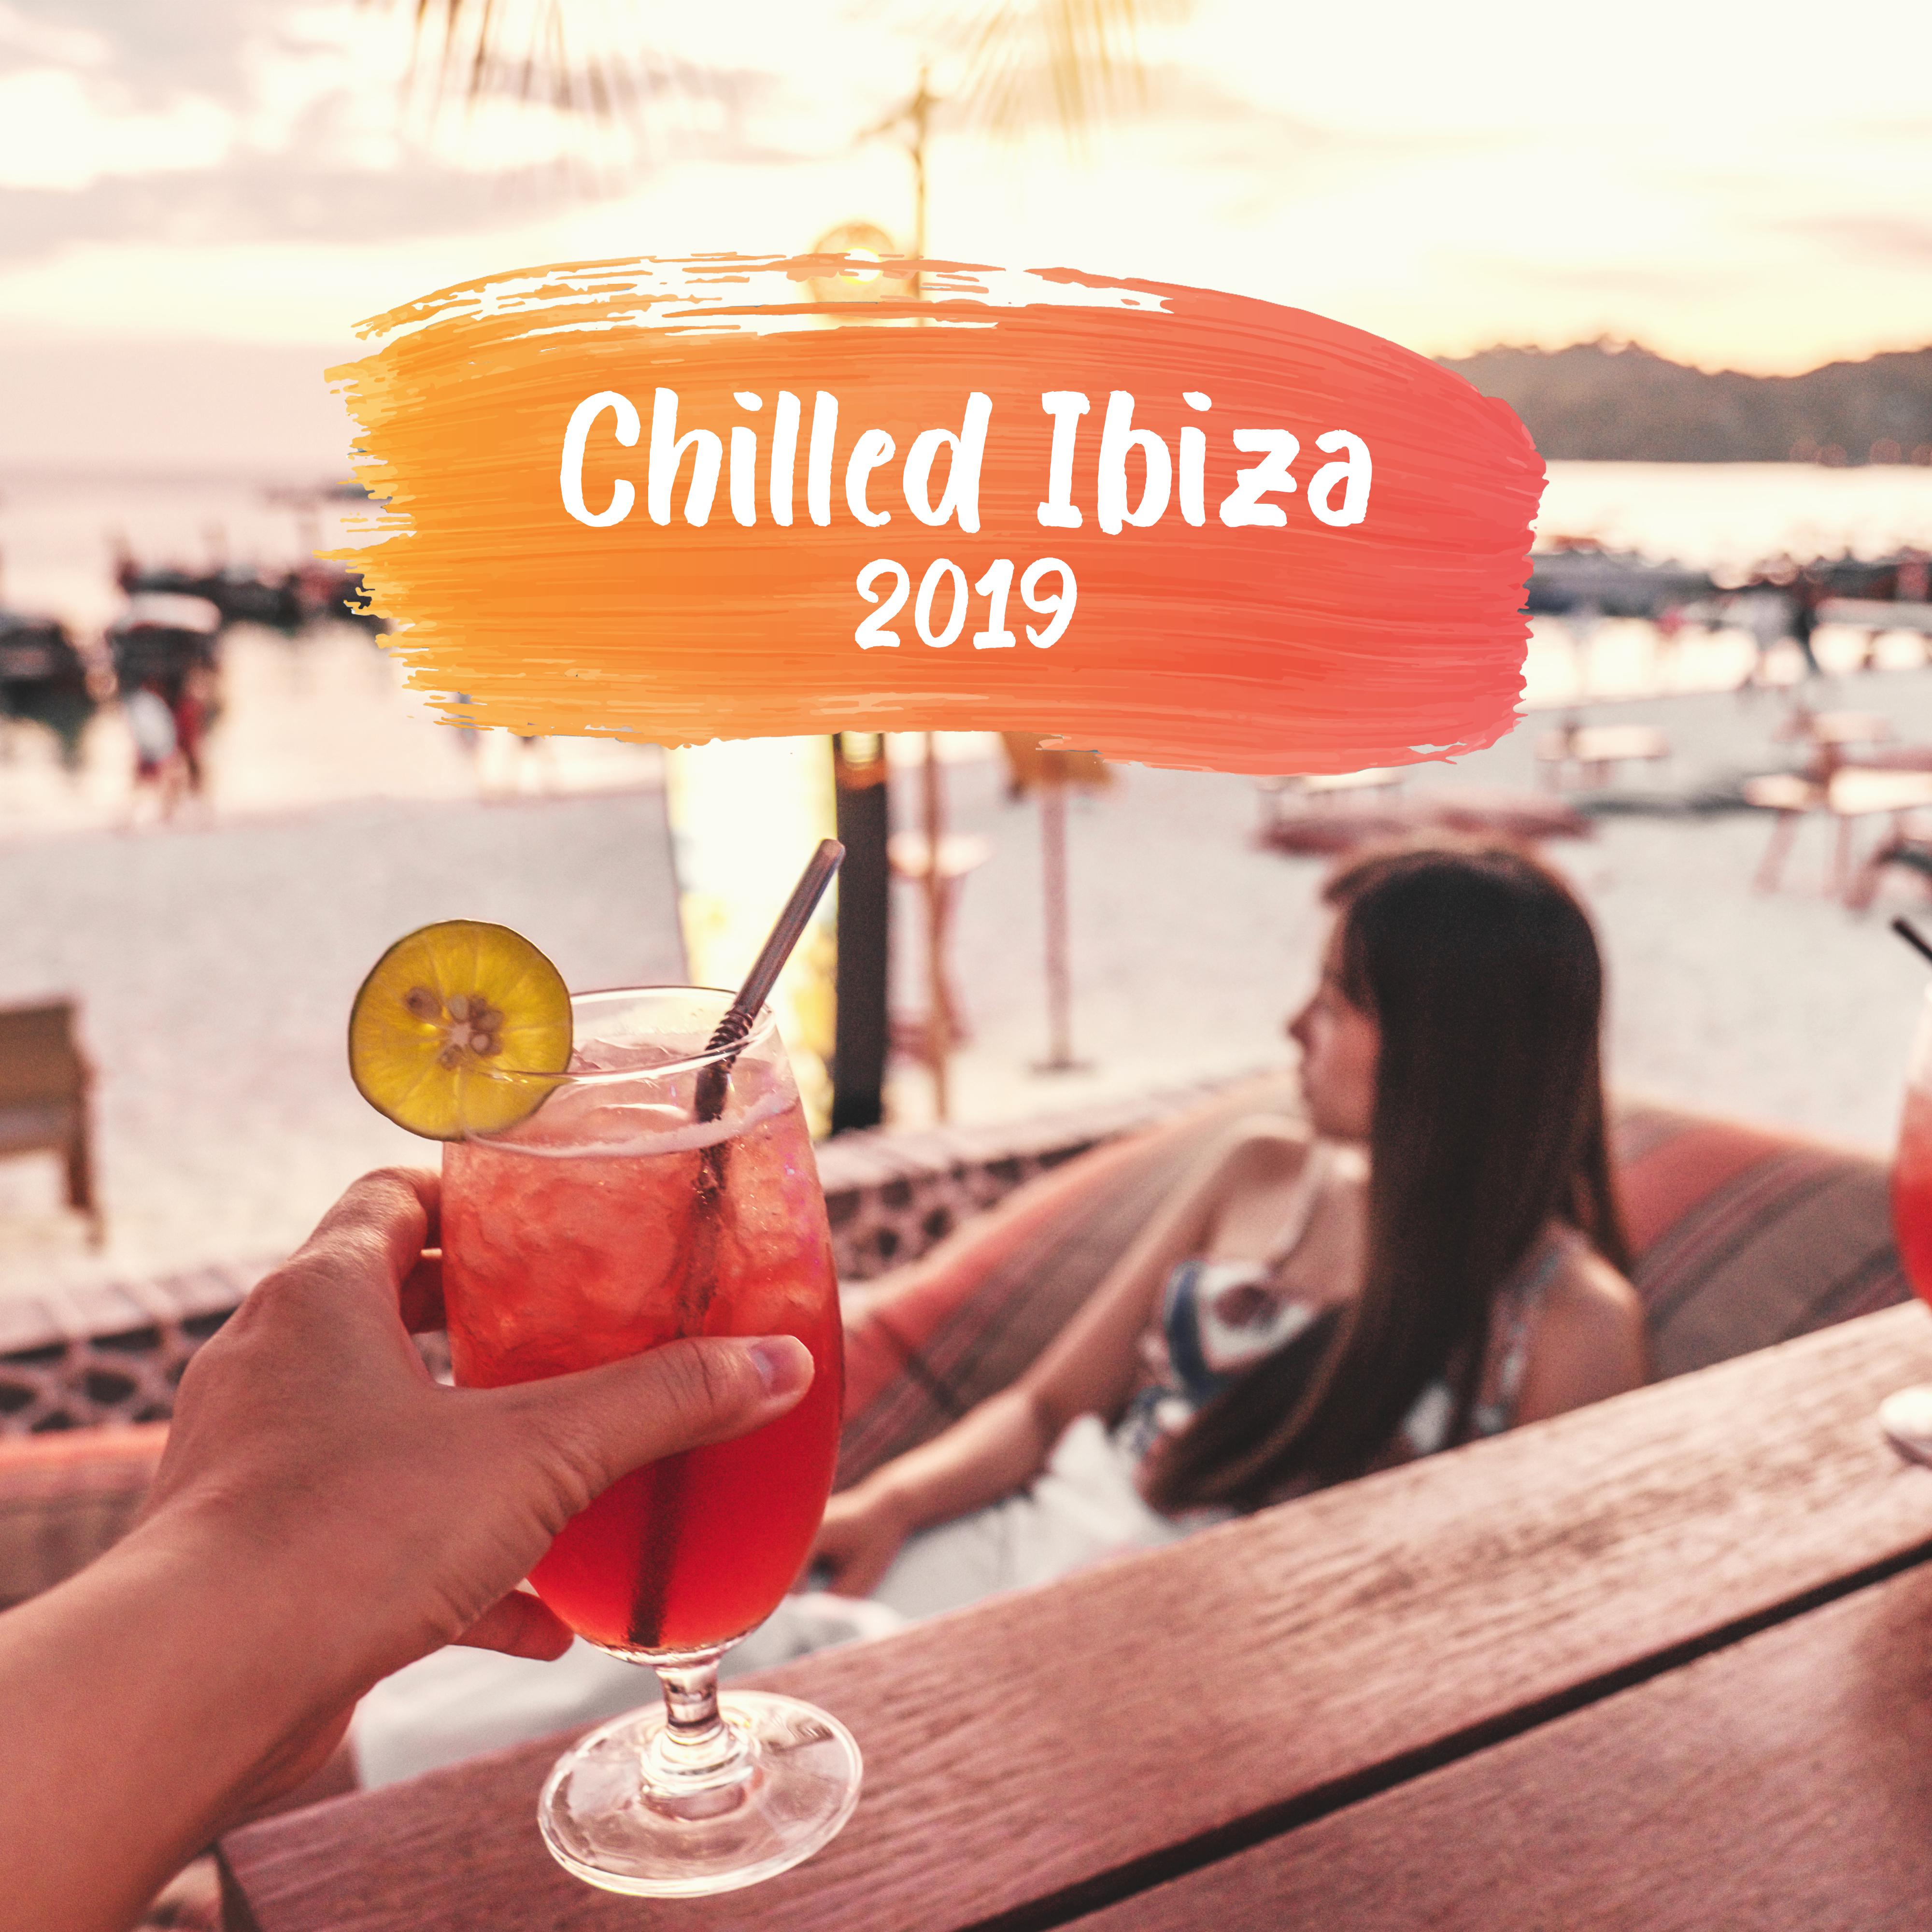 Chilled Ibiza 2019: Deep Relax, **** Club Chillout, Ibiza Relax Lounge, Summer Music 2019, Chillout Relaxation Tunes